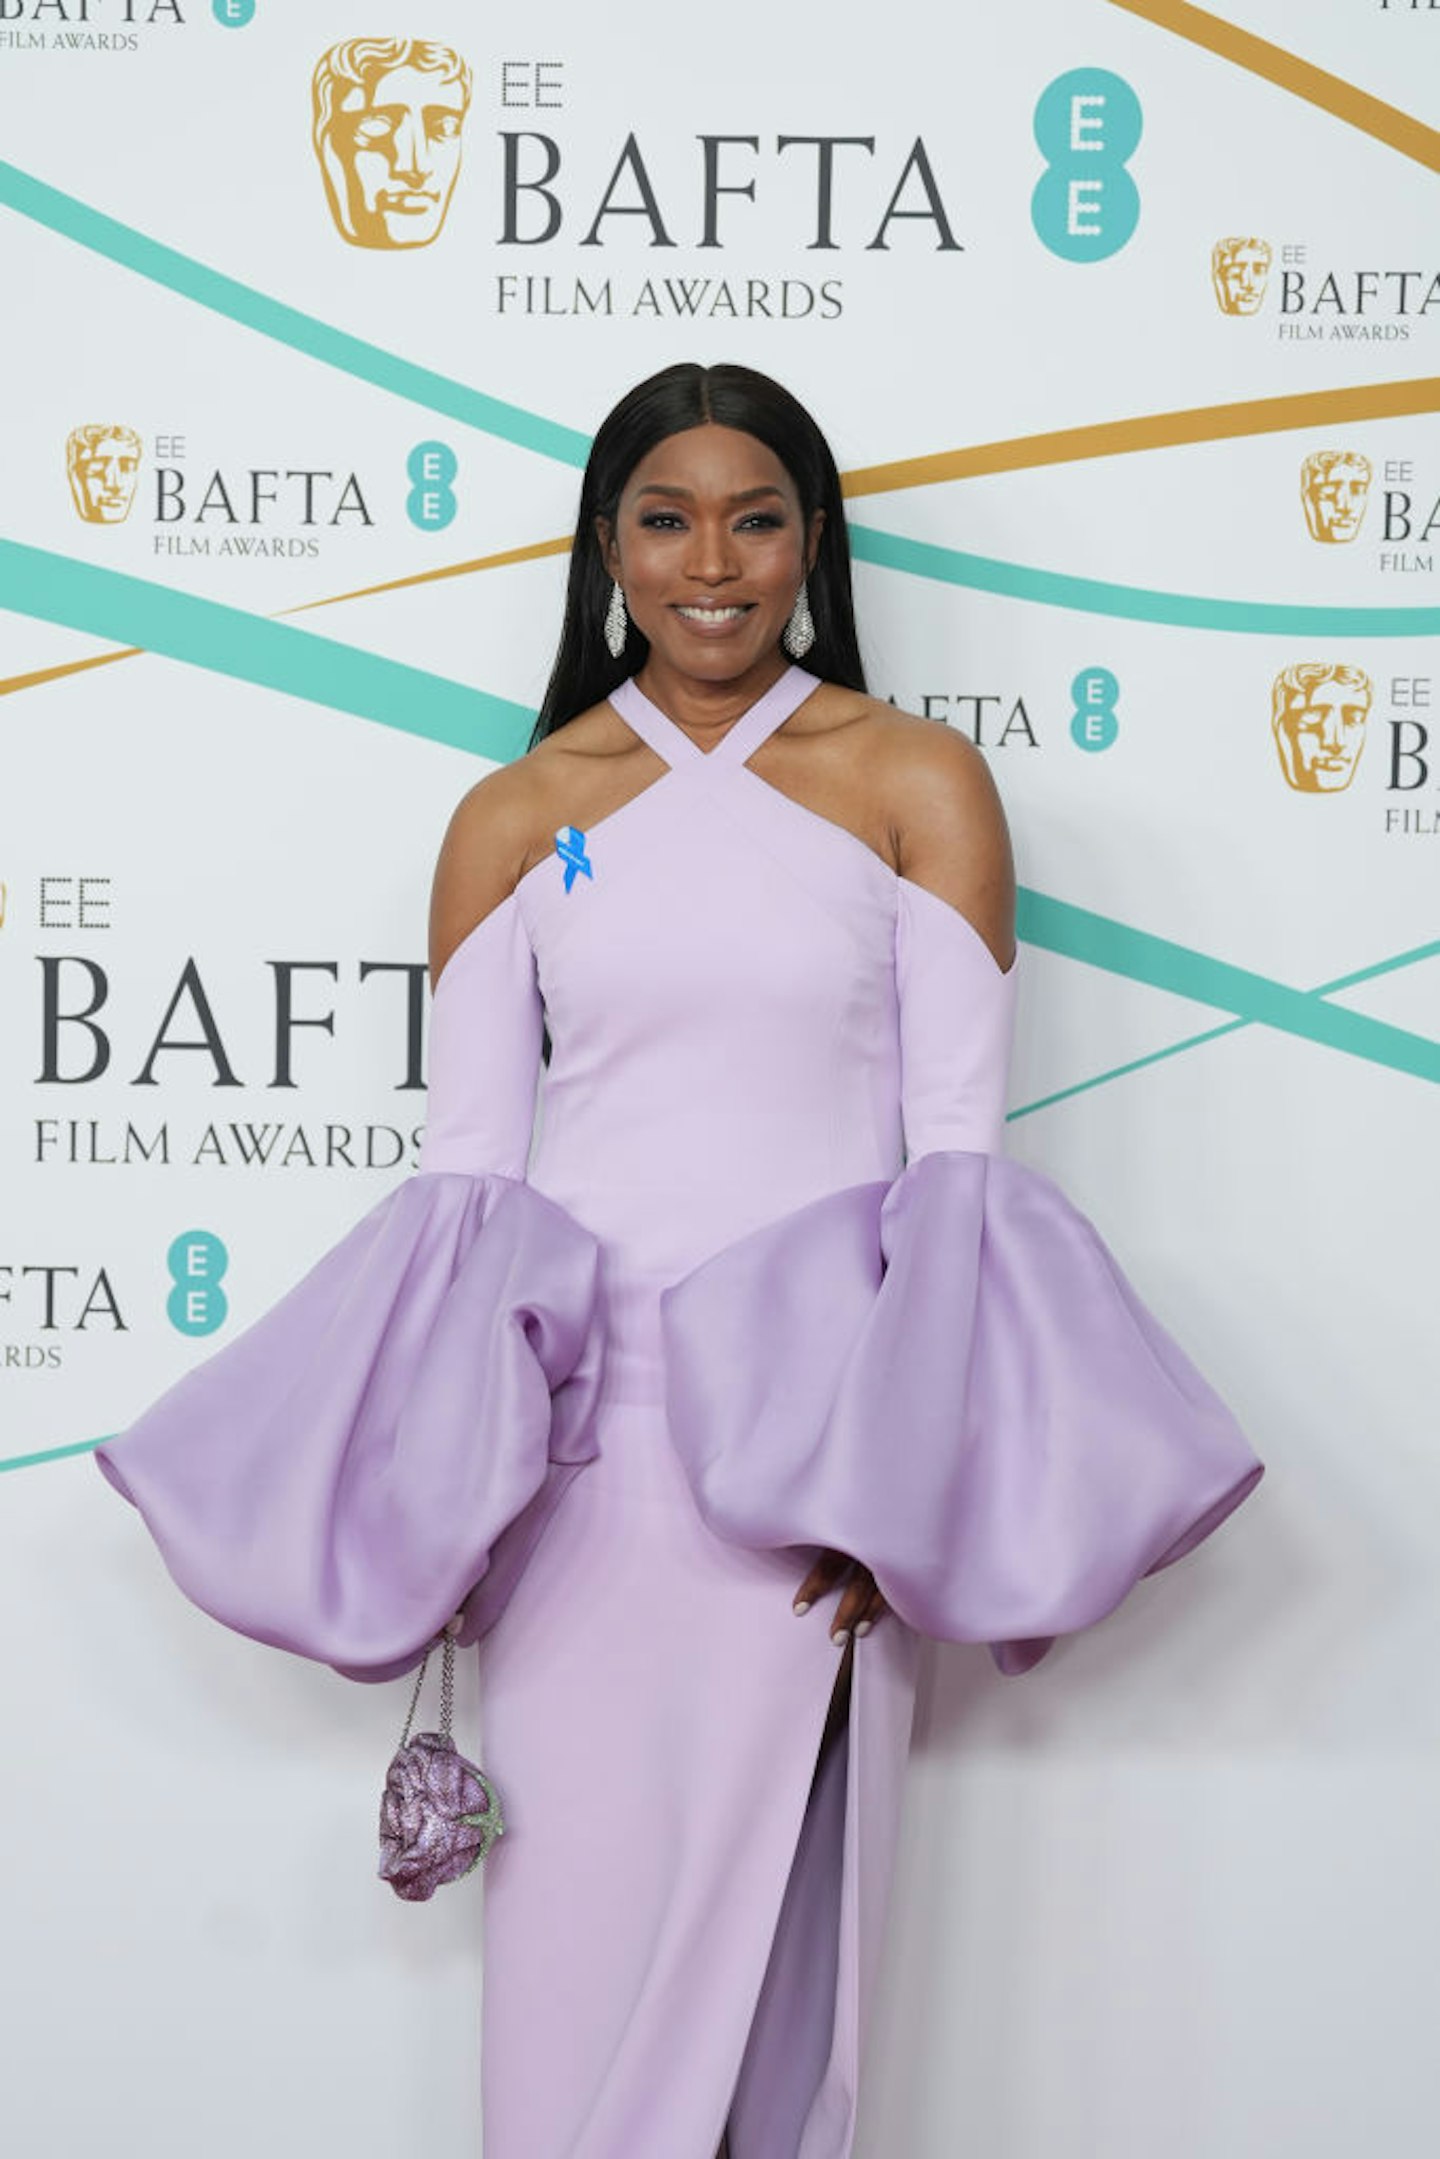 Here's Why Celebrities Were Wearing Blue Ribbons On The BAFTA Red Carpet